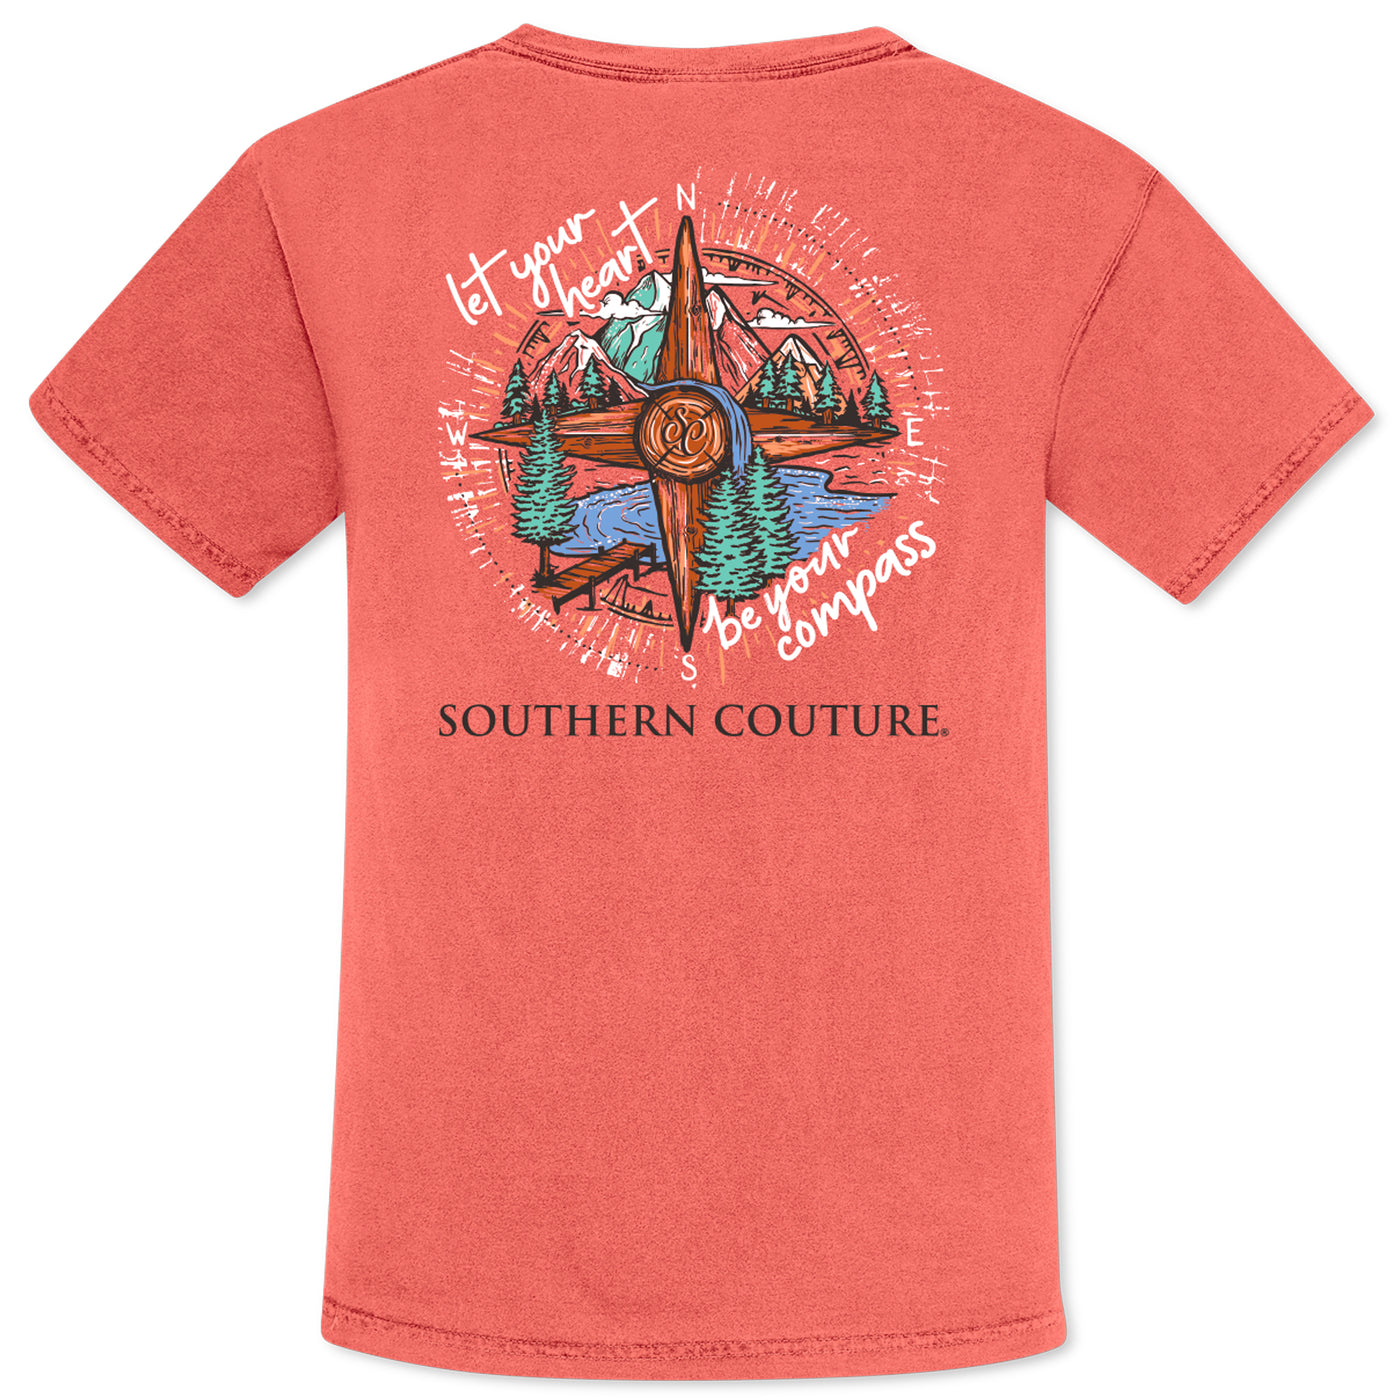 Southern Couture Heart Be Your Compass Bright Salmon SS